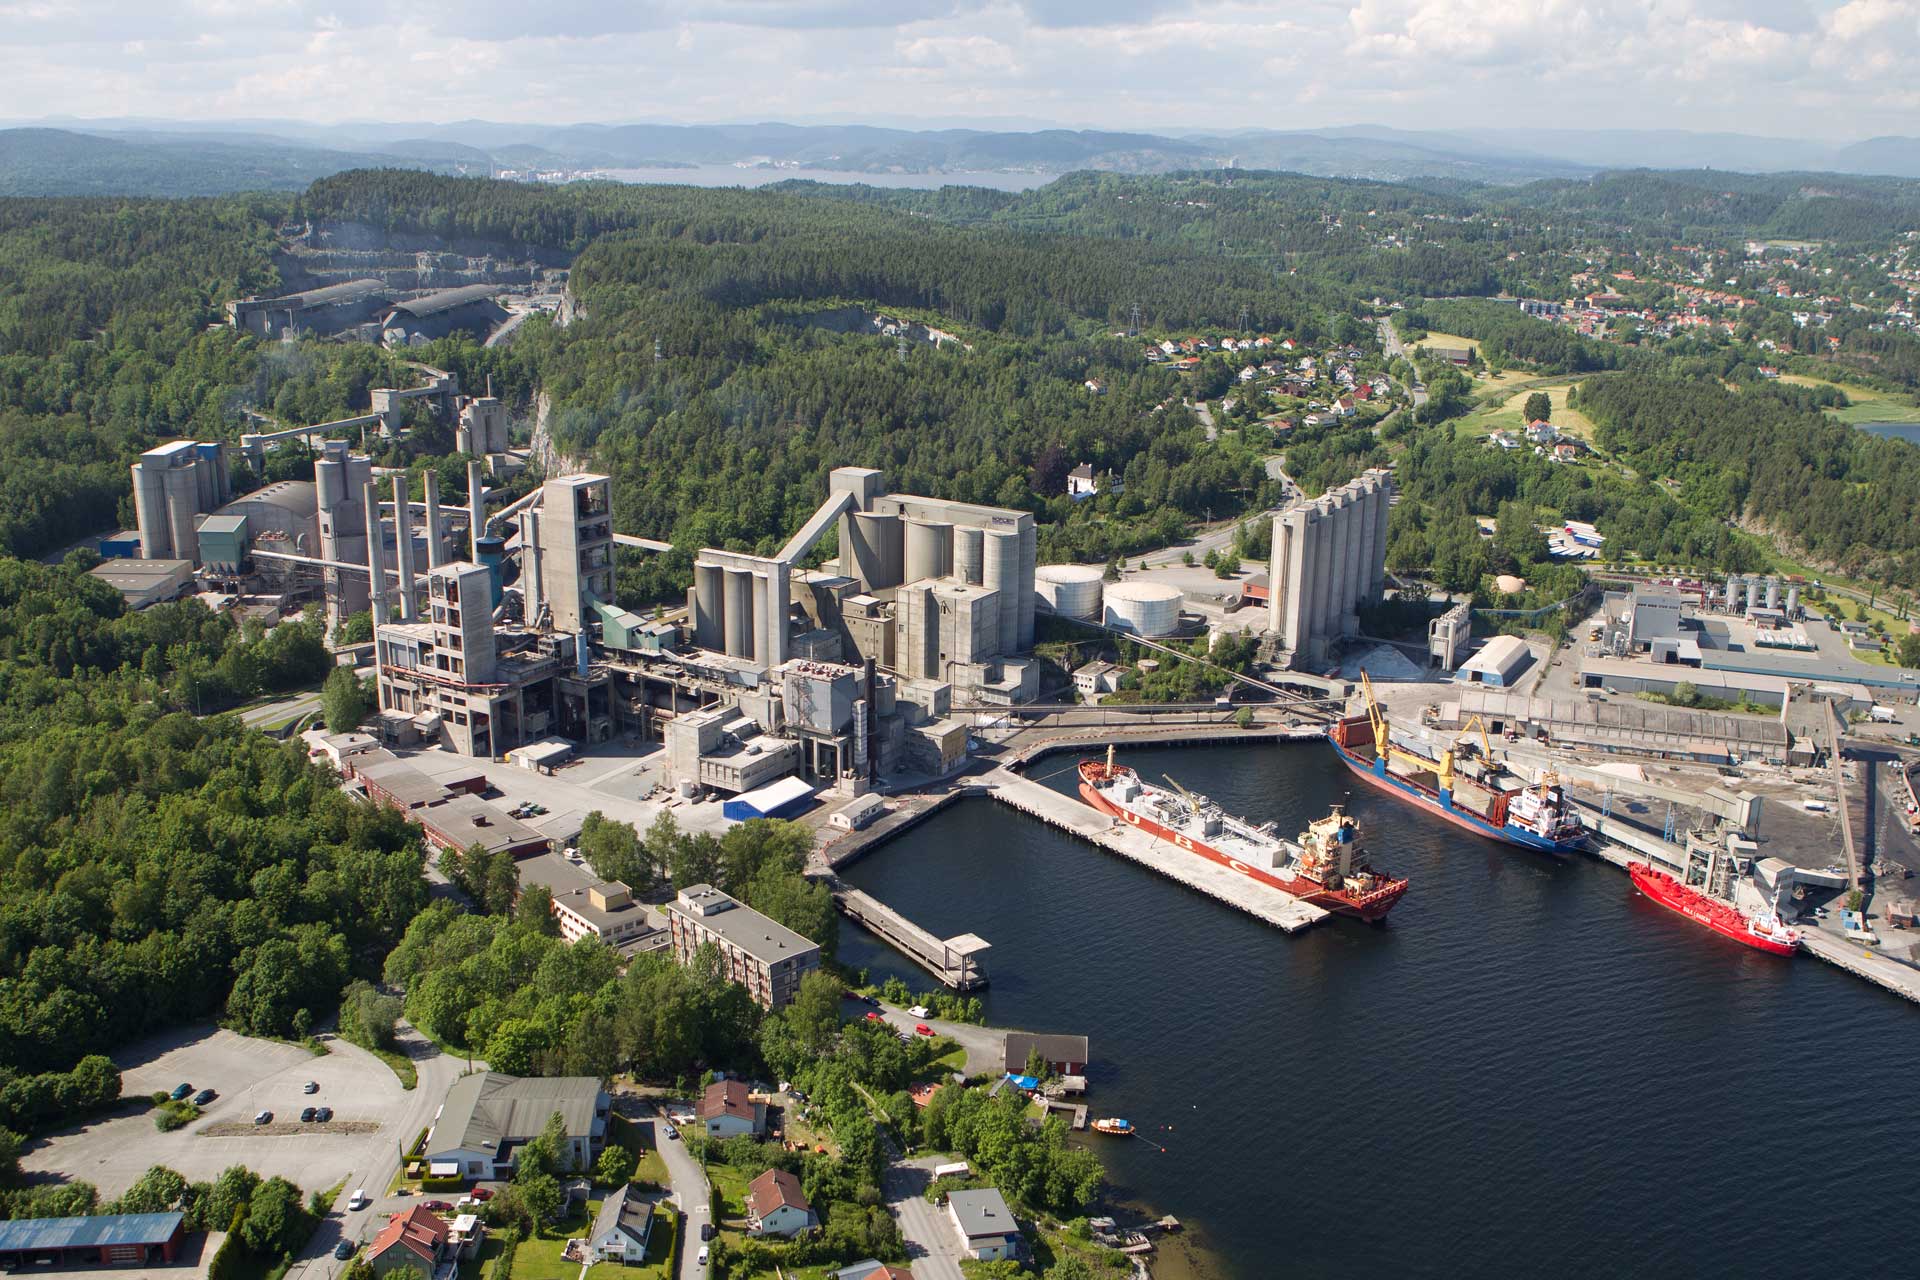 An aerial view of a large industrial facility by the water, showcasing silos, tall buildings, and a docked ship at a pier, surrounded by forest and distant buildings.